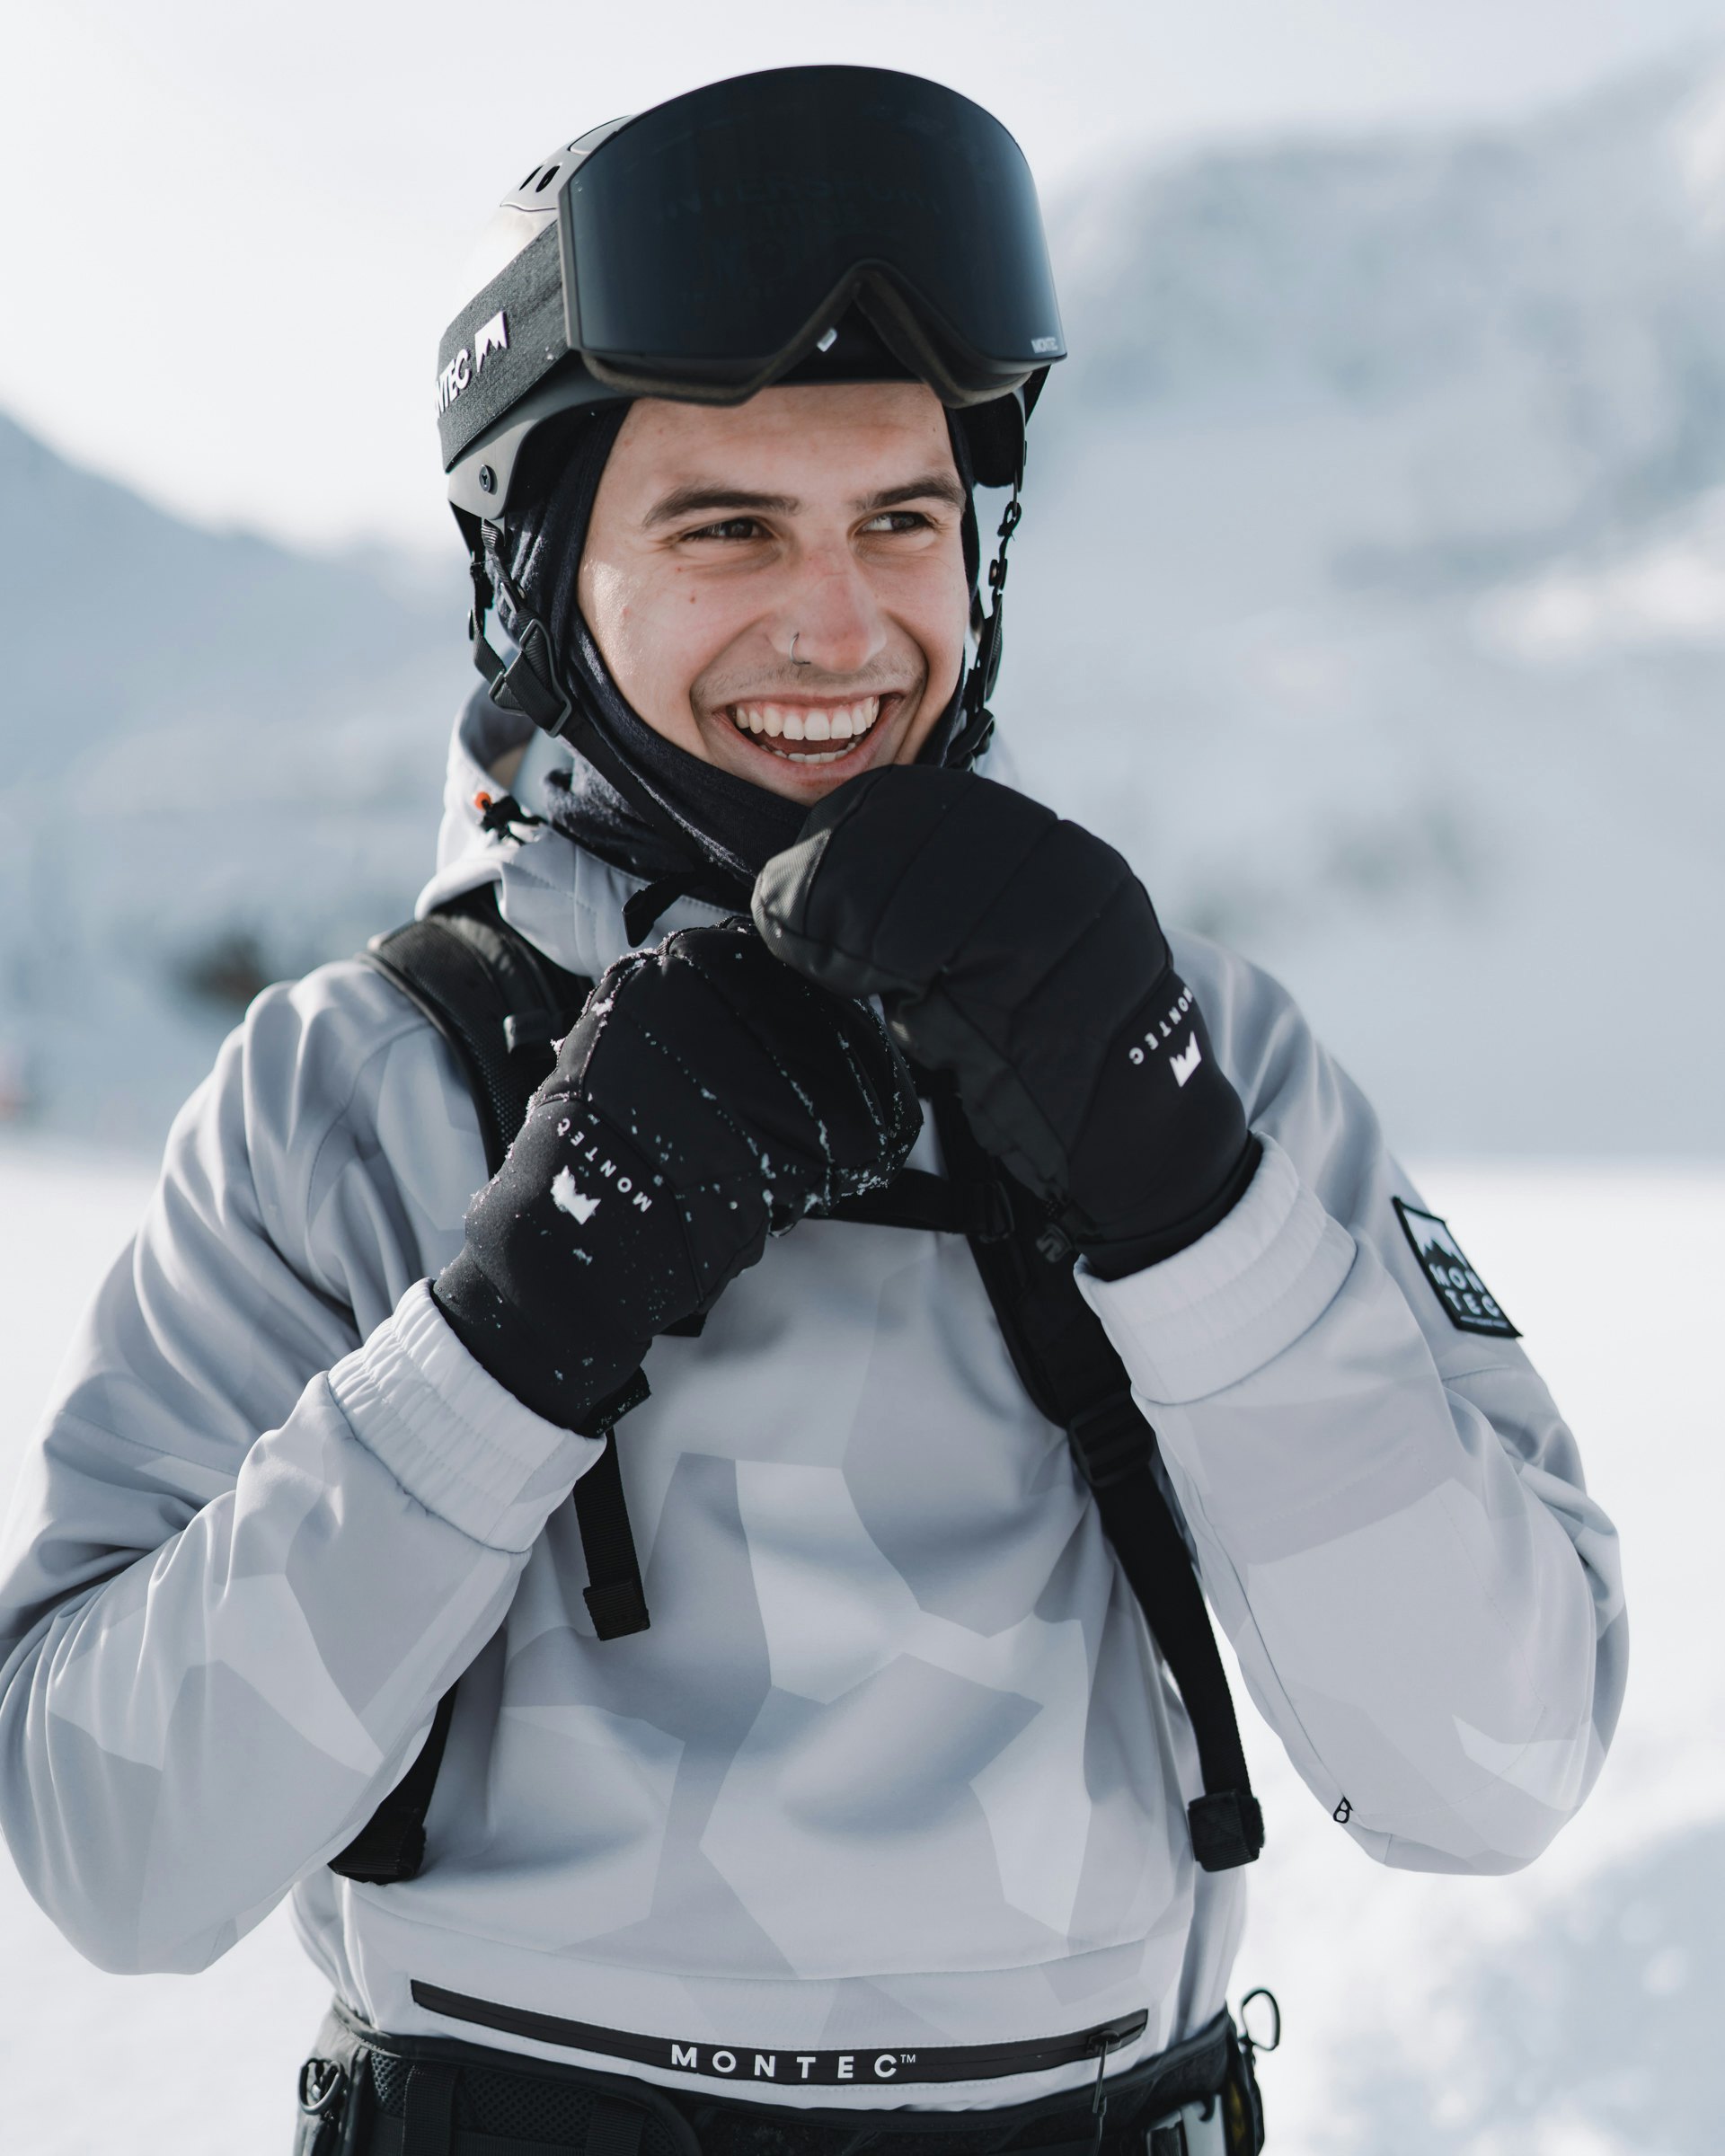 Protective skiing equipment and ski outerwear: Gear guide